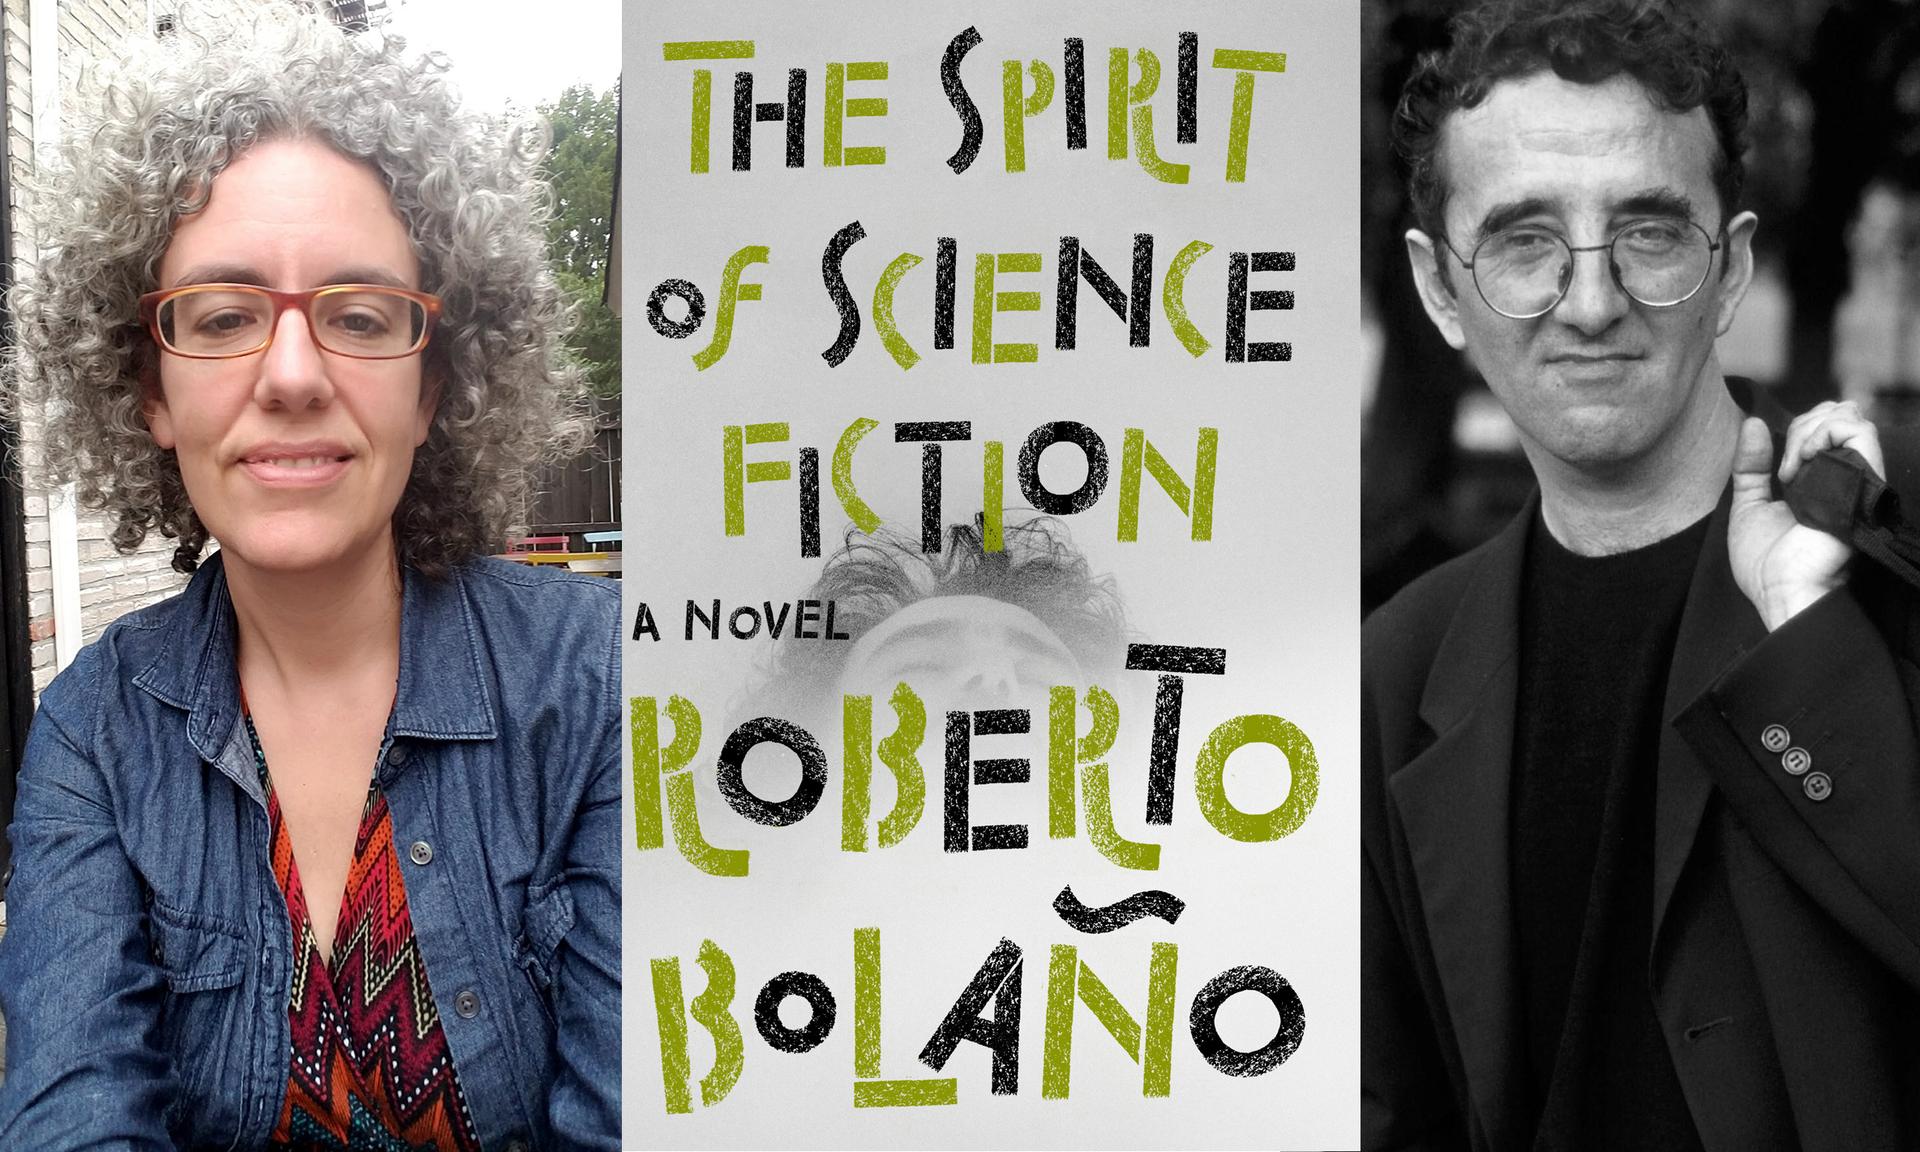 Translator Natasha Wimmer, the book cover for “The Spirit of Science Fiction” and the author Roberto Bolaño.